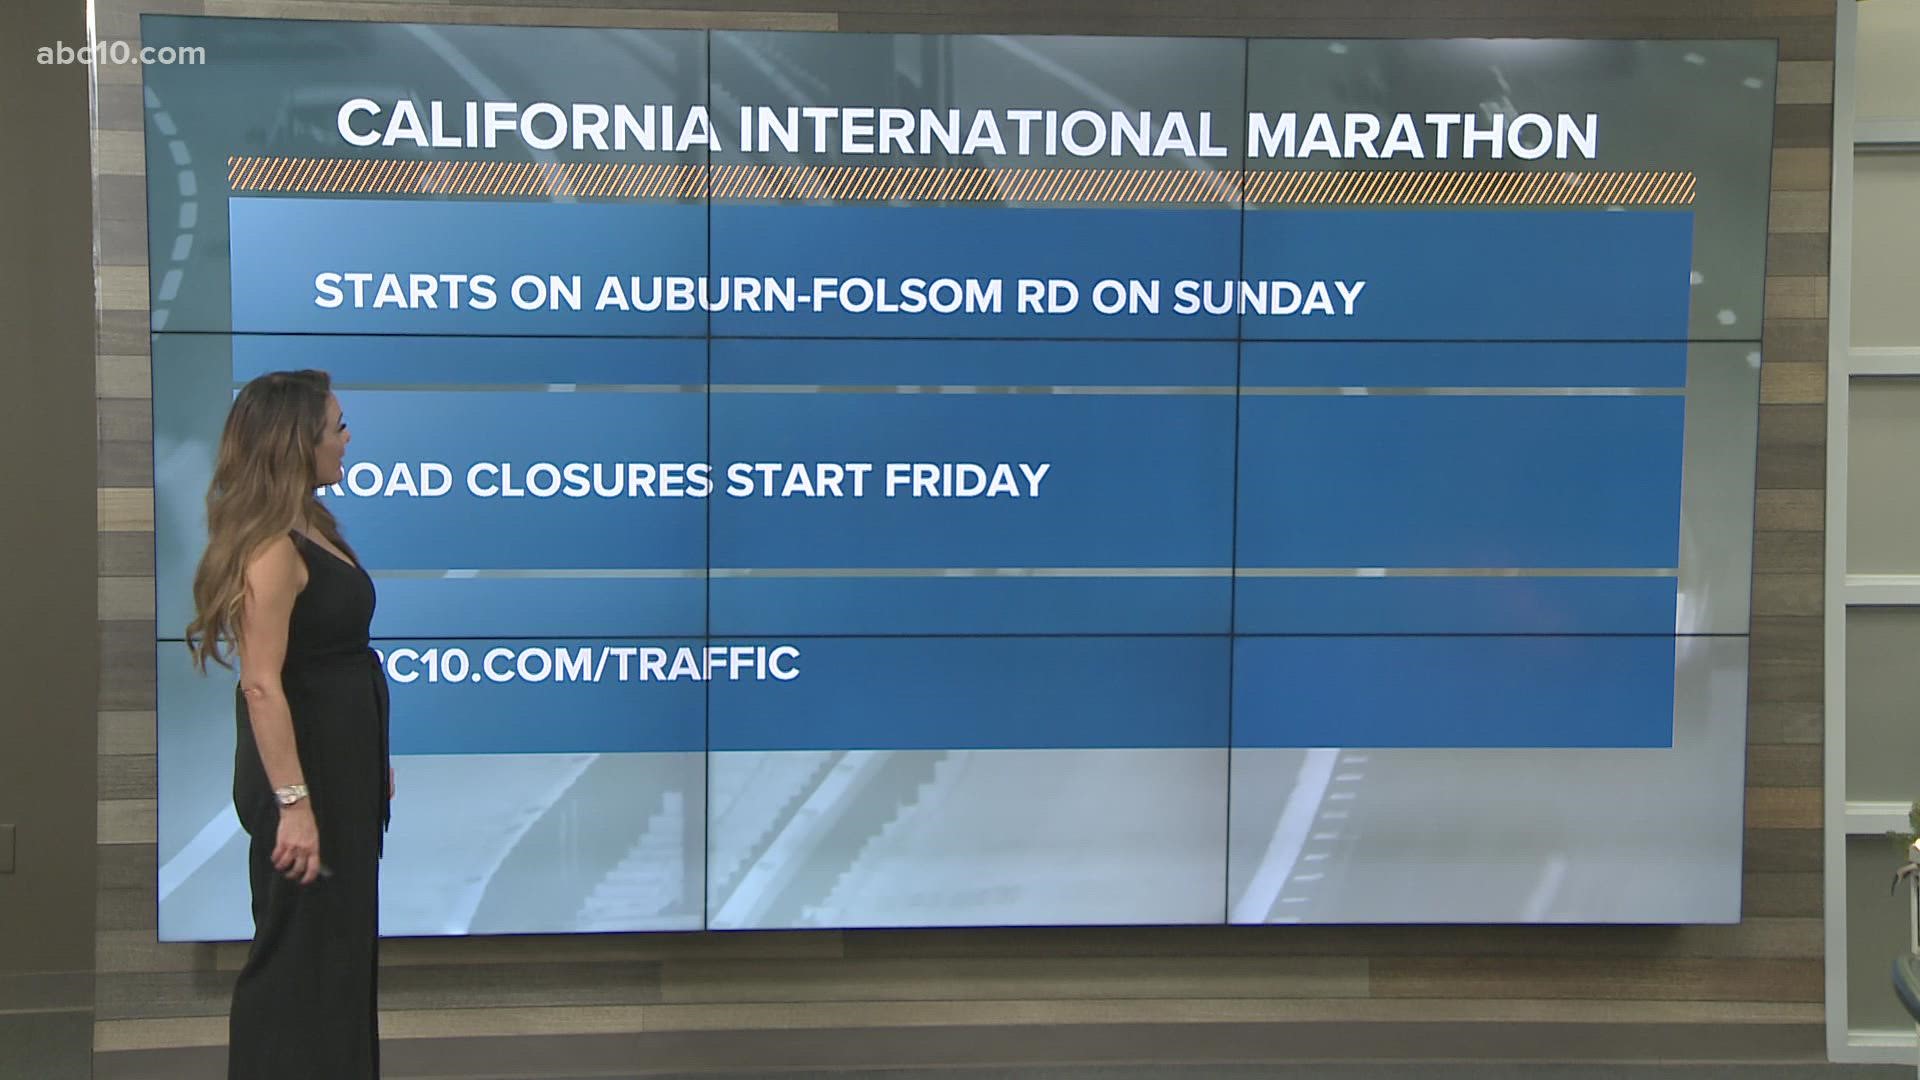 ABC10's Brittany Begley breaks down which roads are closed and when for the California International Marathon.